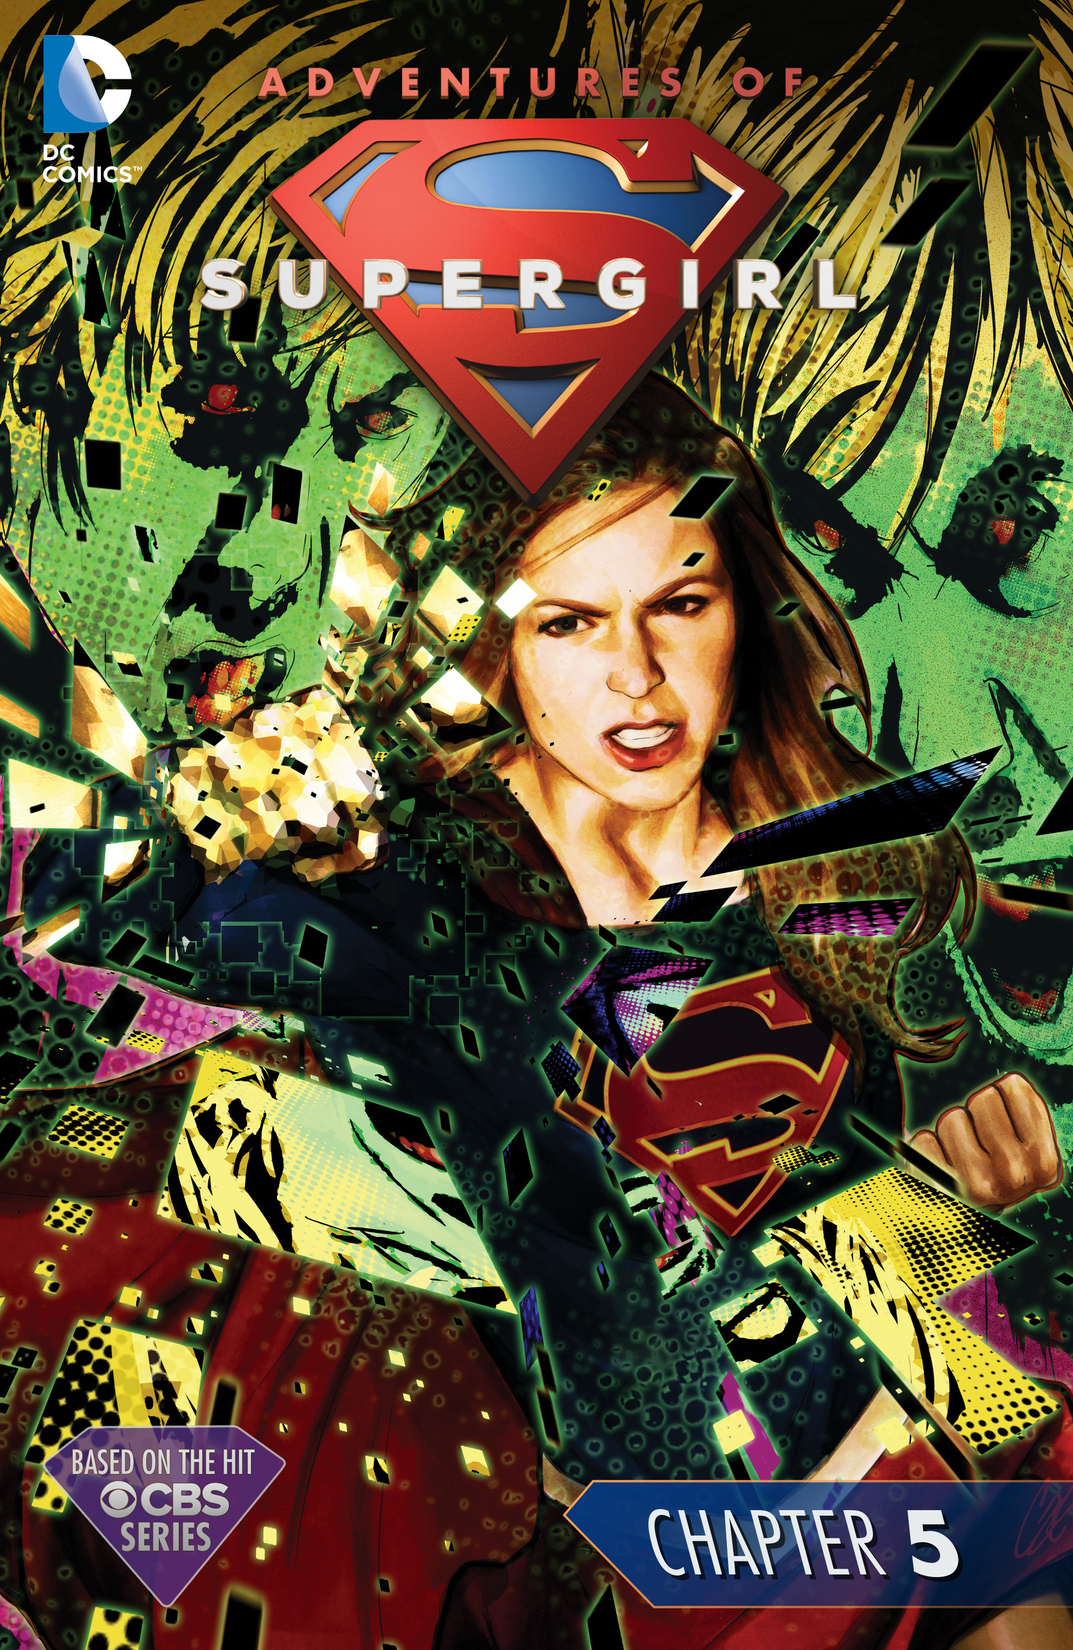 The Adventures of Supergirl #5 preview images